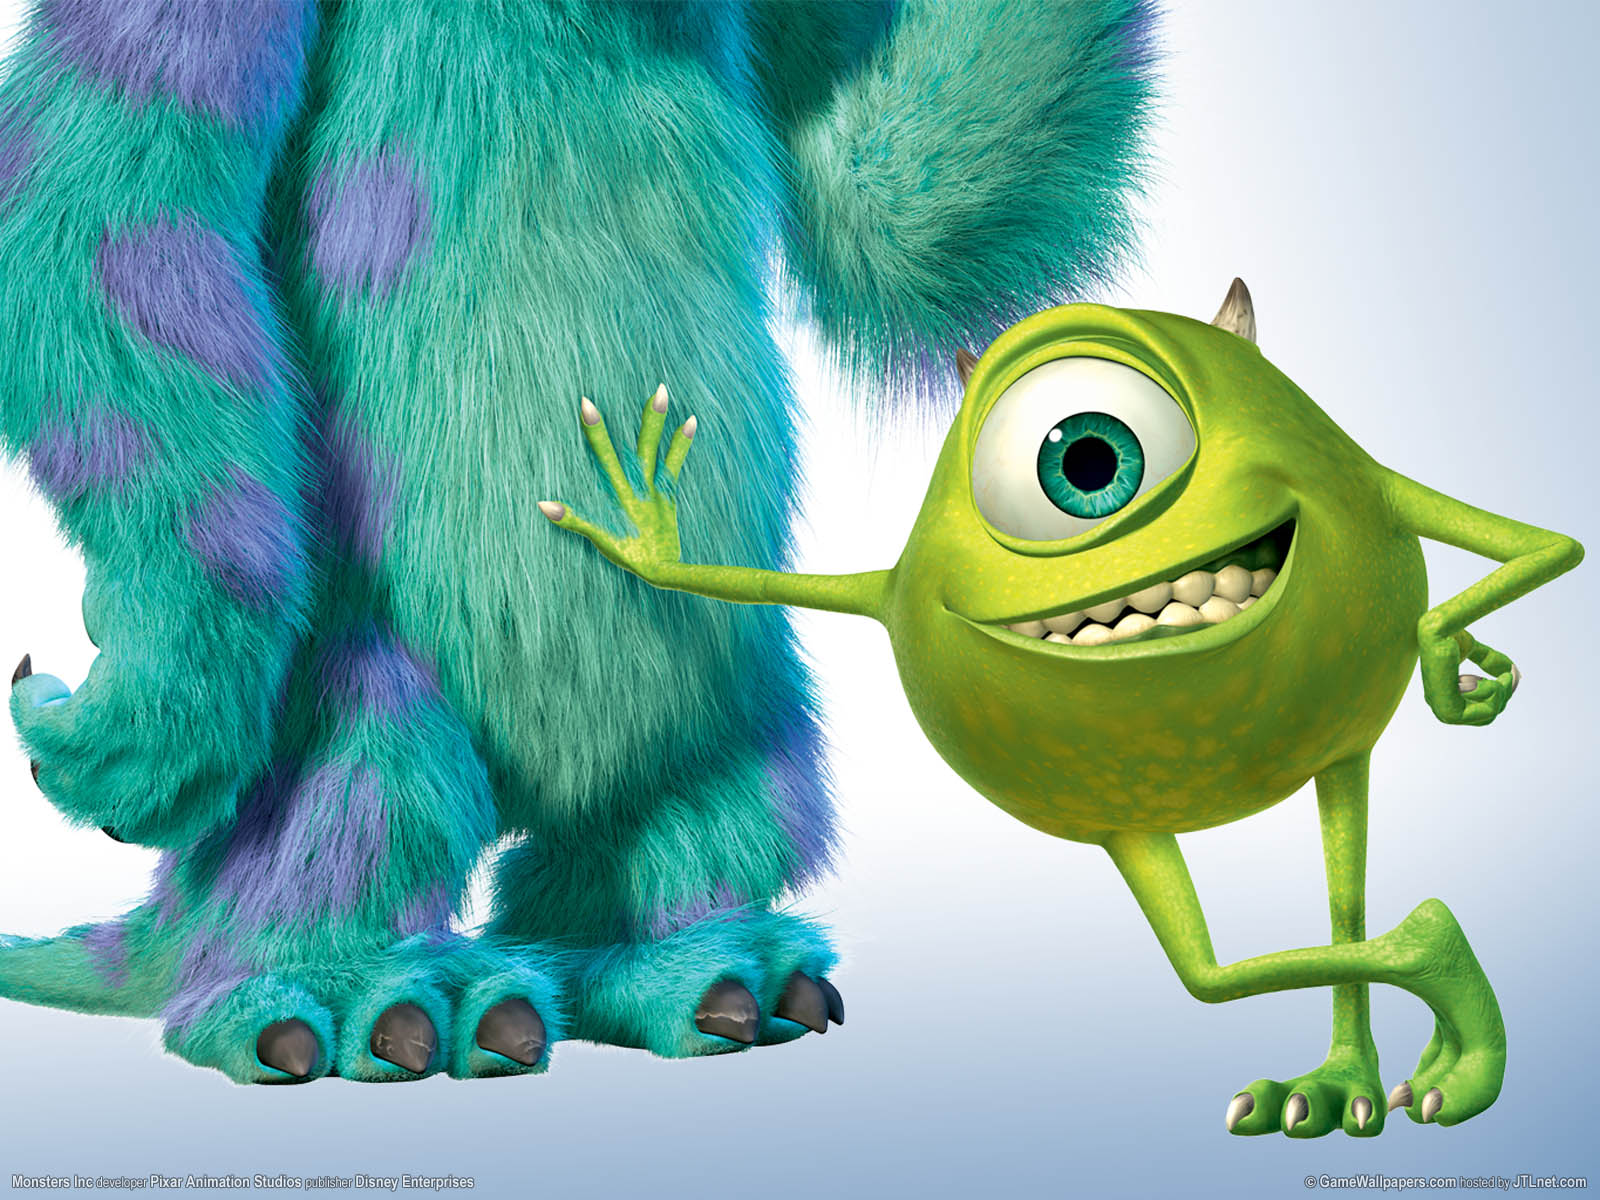 Monsters Inc achtergrond 03 1600x1200